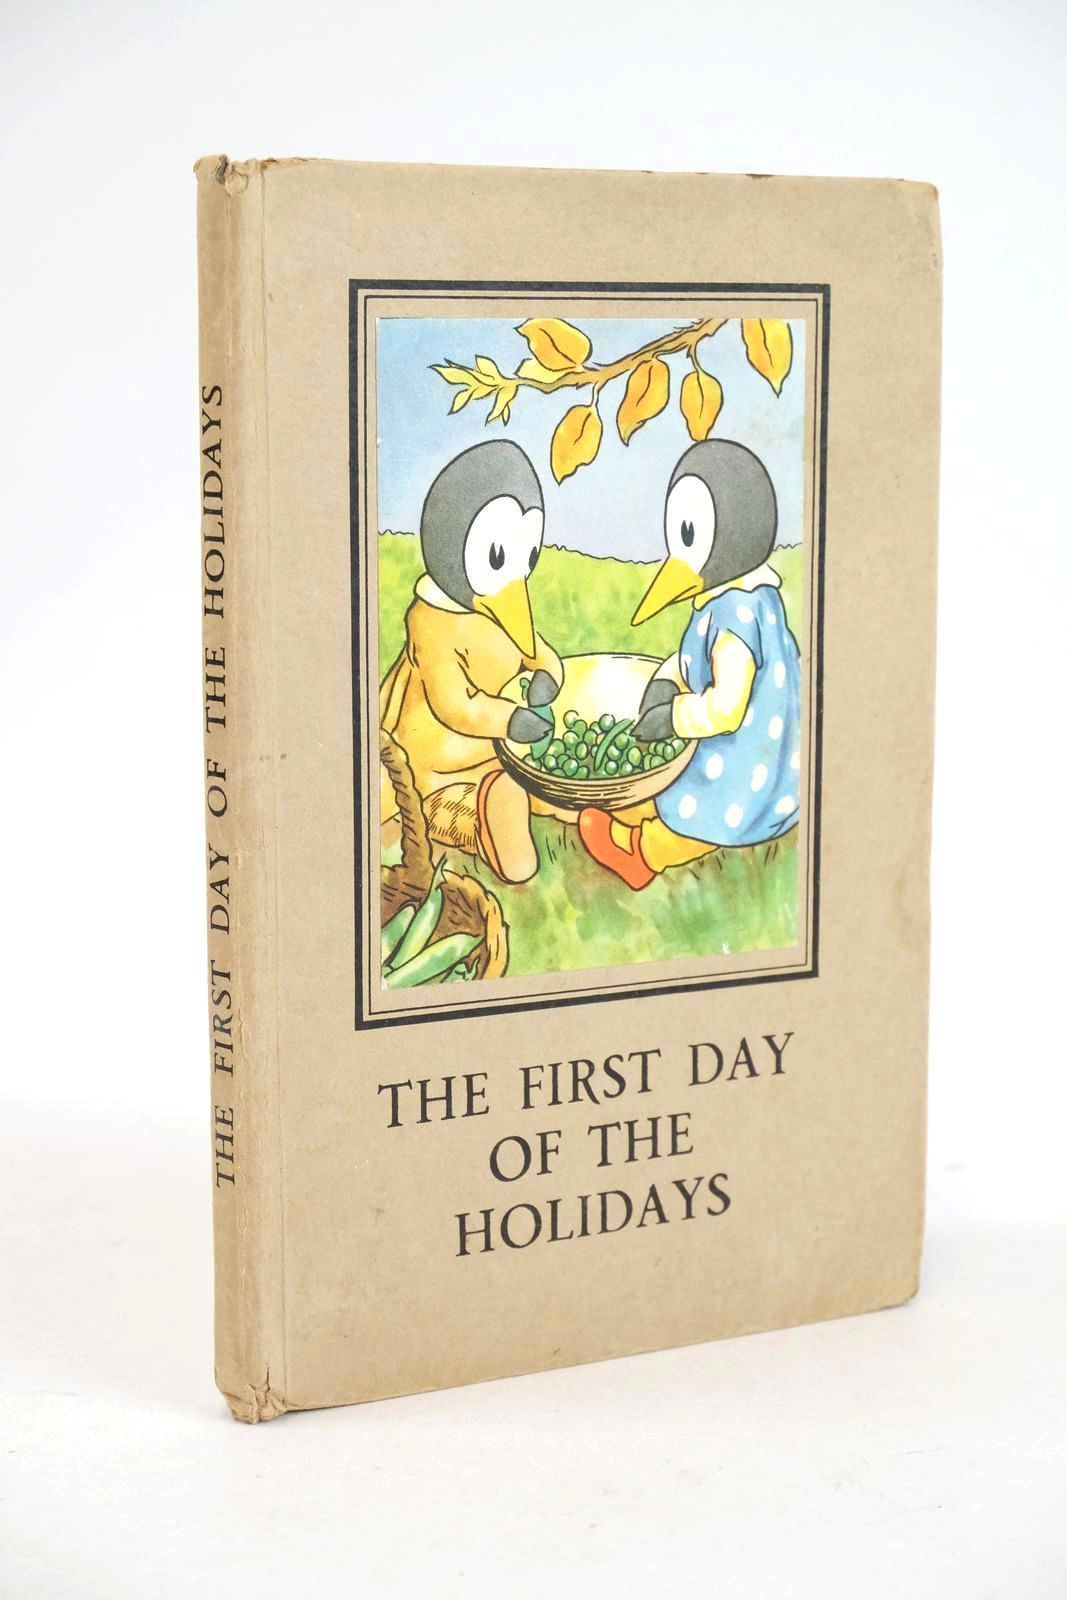 Photo of THE FIRST DAY OF THE HOLIDAYS written by Macgregor, A.J. Perring, W. illustrated by Macgregor, A.J. published by Wills &amp; Hepworth Ltd. (STOCK CODE: 1325480)  for sale by Stella & Rose's Books